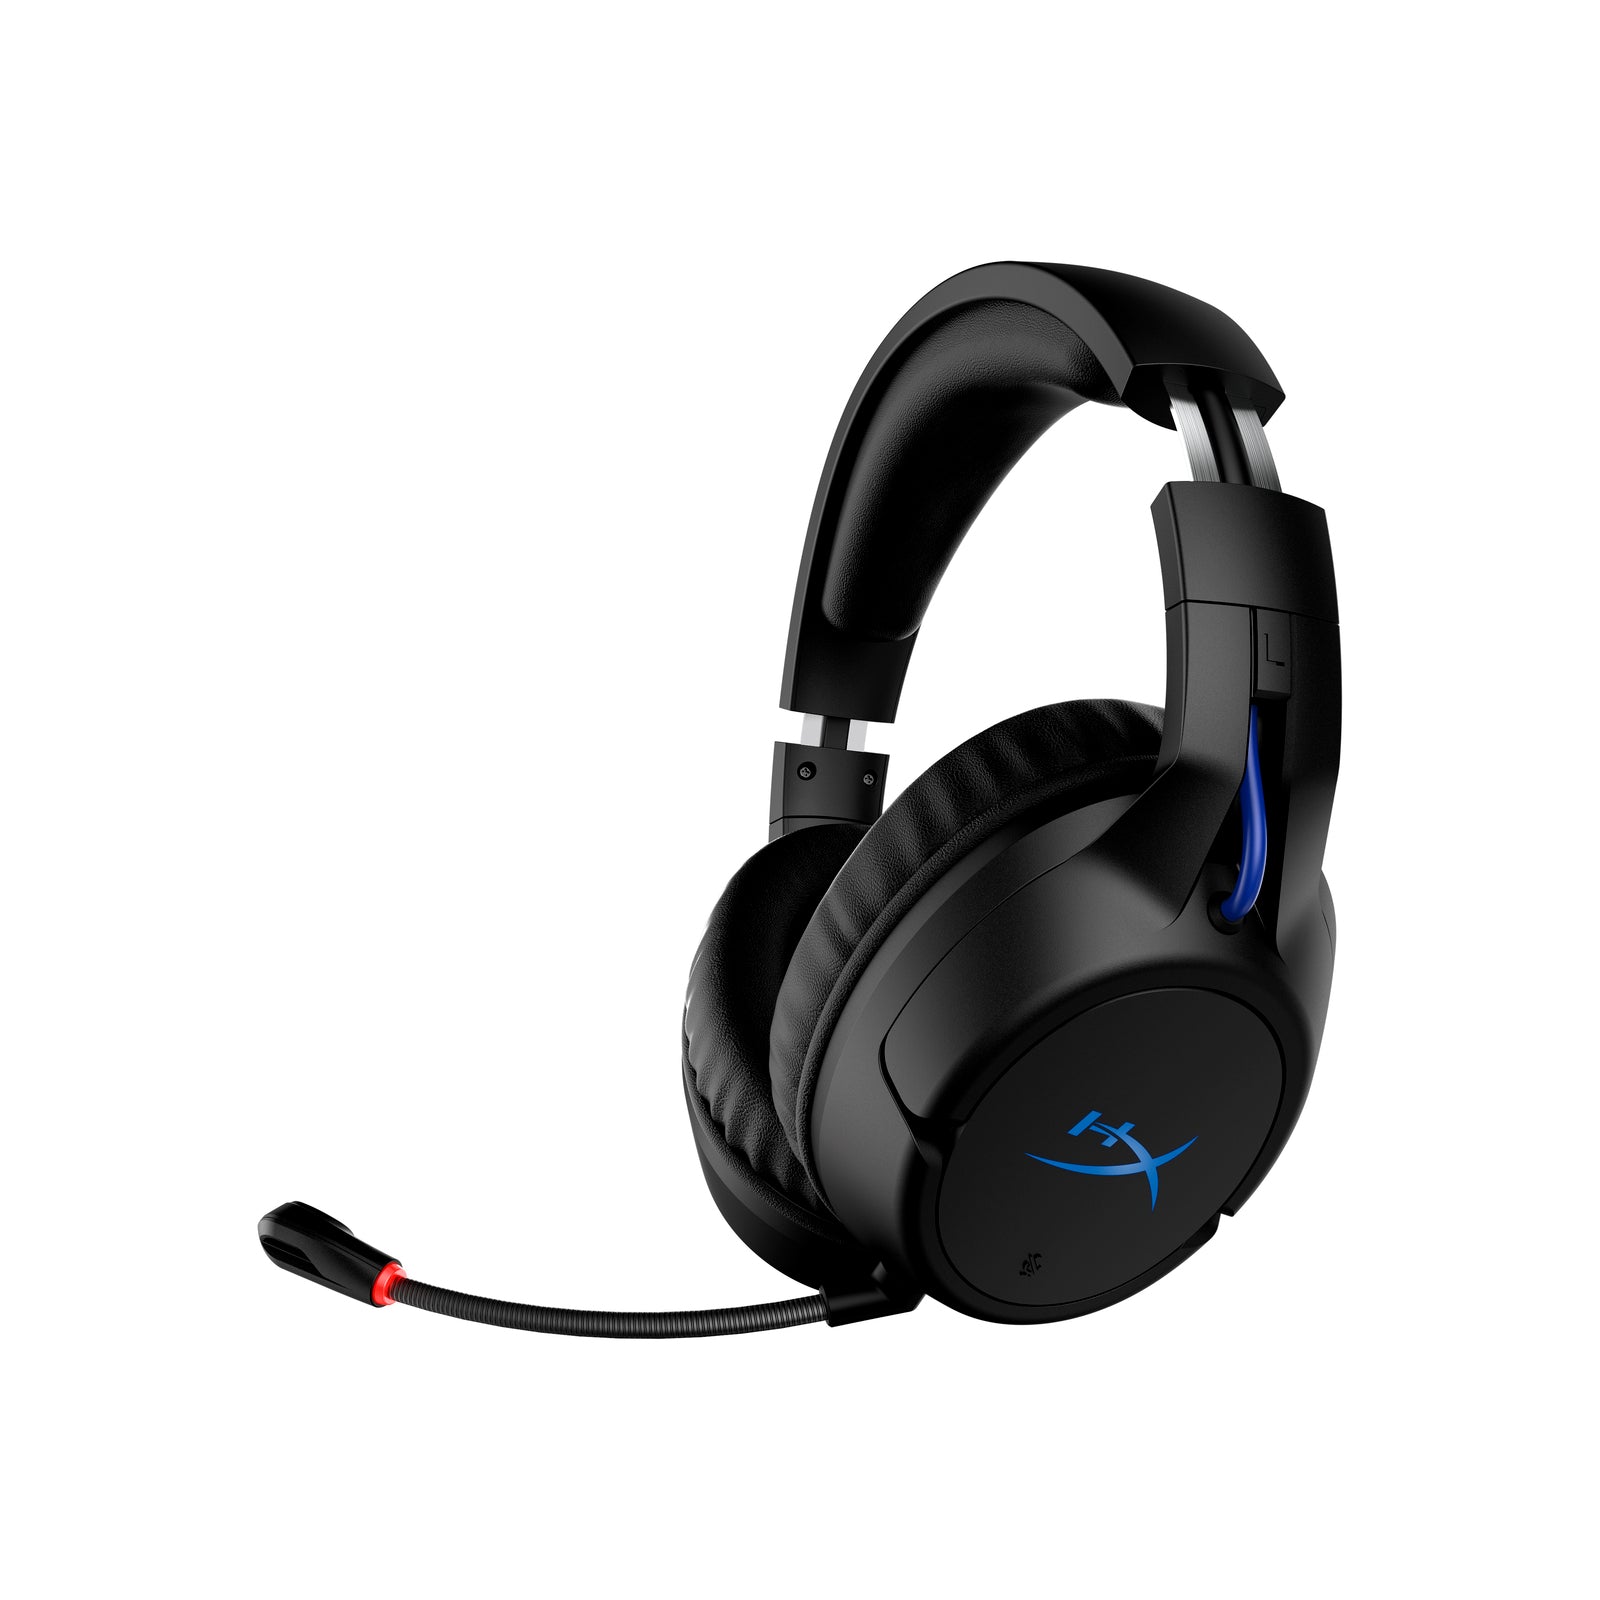 For ROW PS4 PS5 Headset and Wireless Gaming Flight HyperX HyperX | – HyperX Cloud –